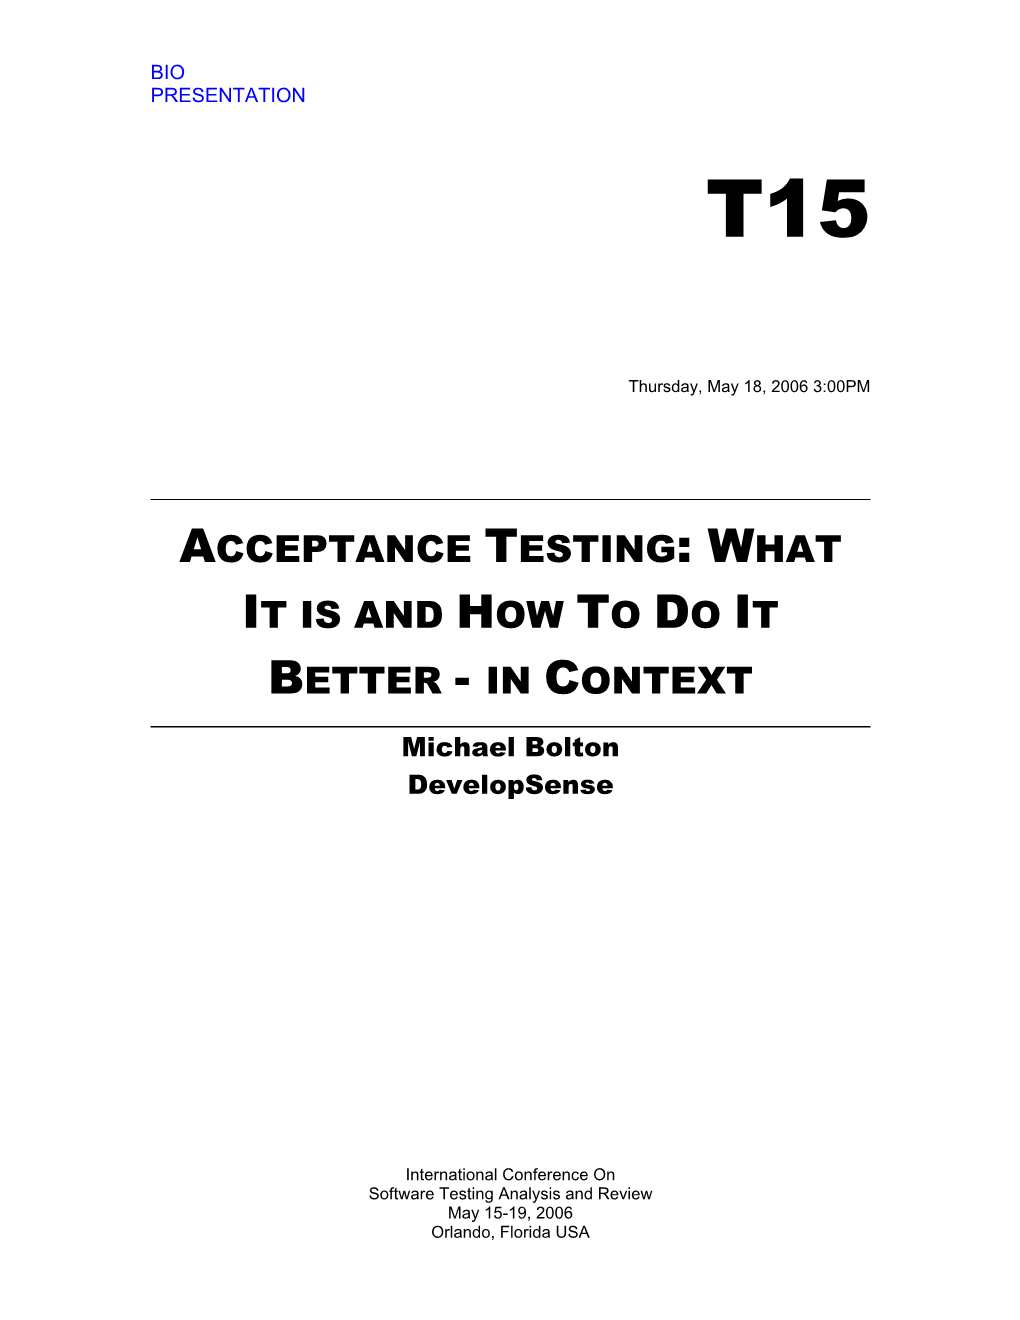 Acceptance Testing: What It Is and How to Do It Better - in Context